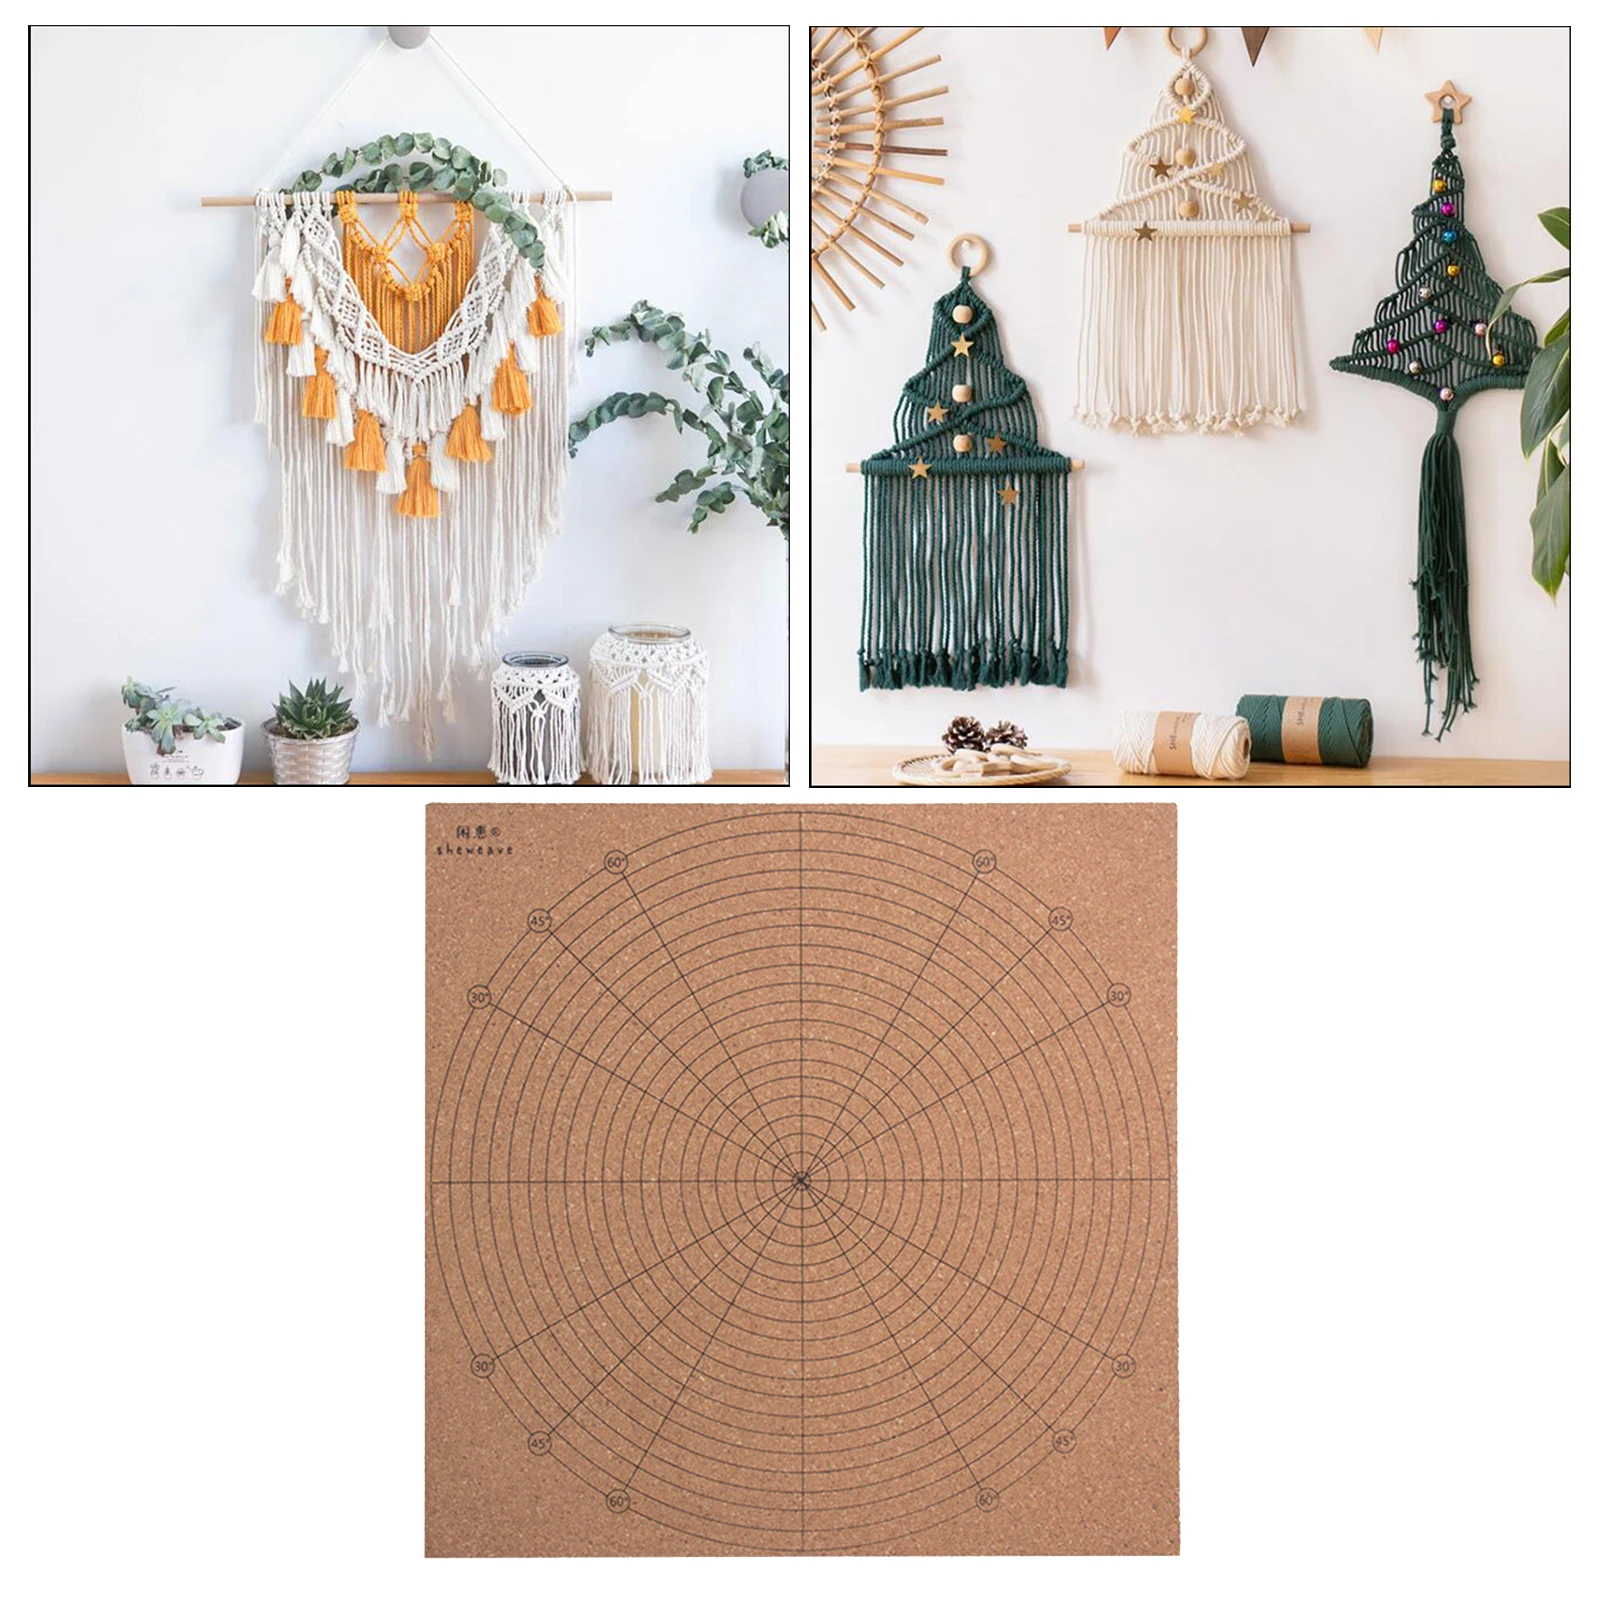 Blocking Boards for Knitting with Grids - Handcrafted Wood Crochet Macrame Board